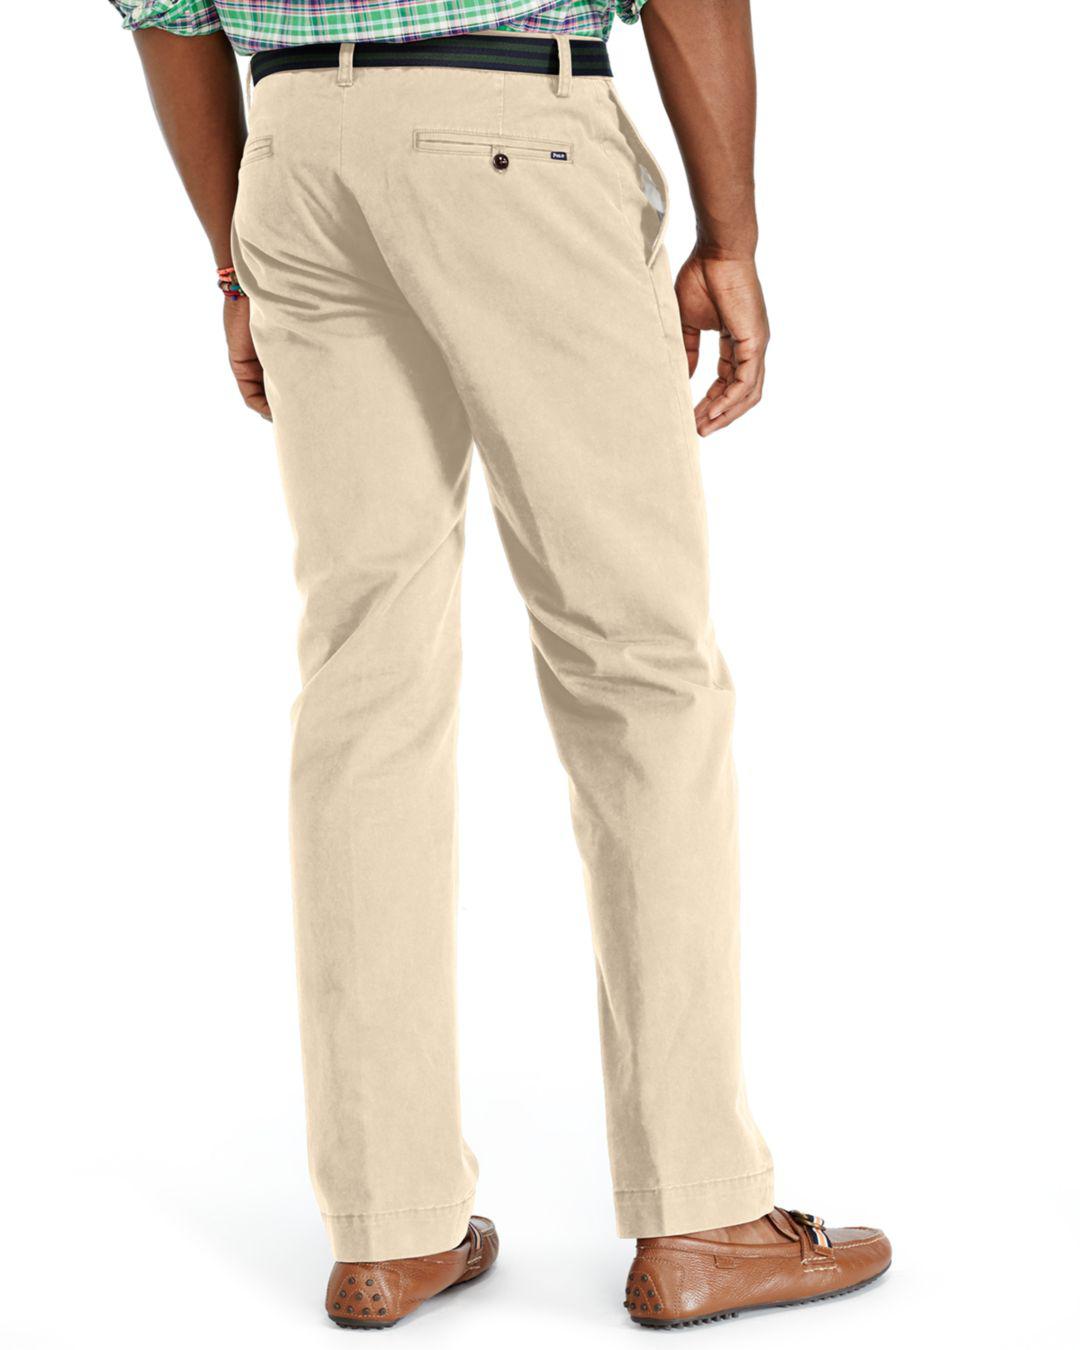 Polo Ralph Lauren Cotton Stretch Classic Fit Chino Pants in Khaki ...